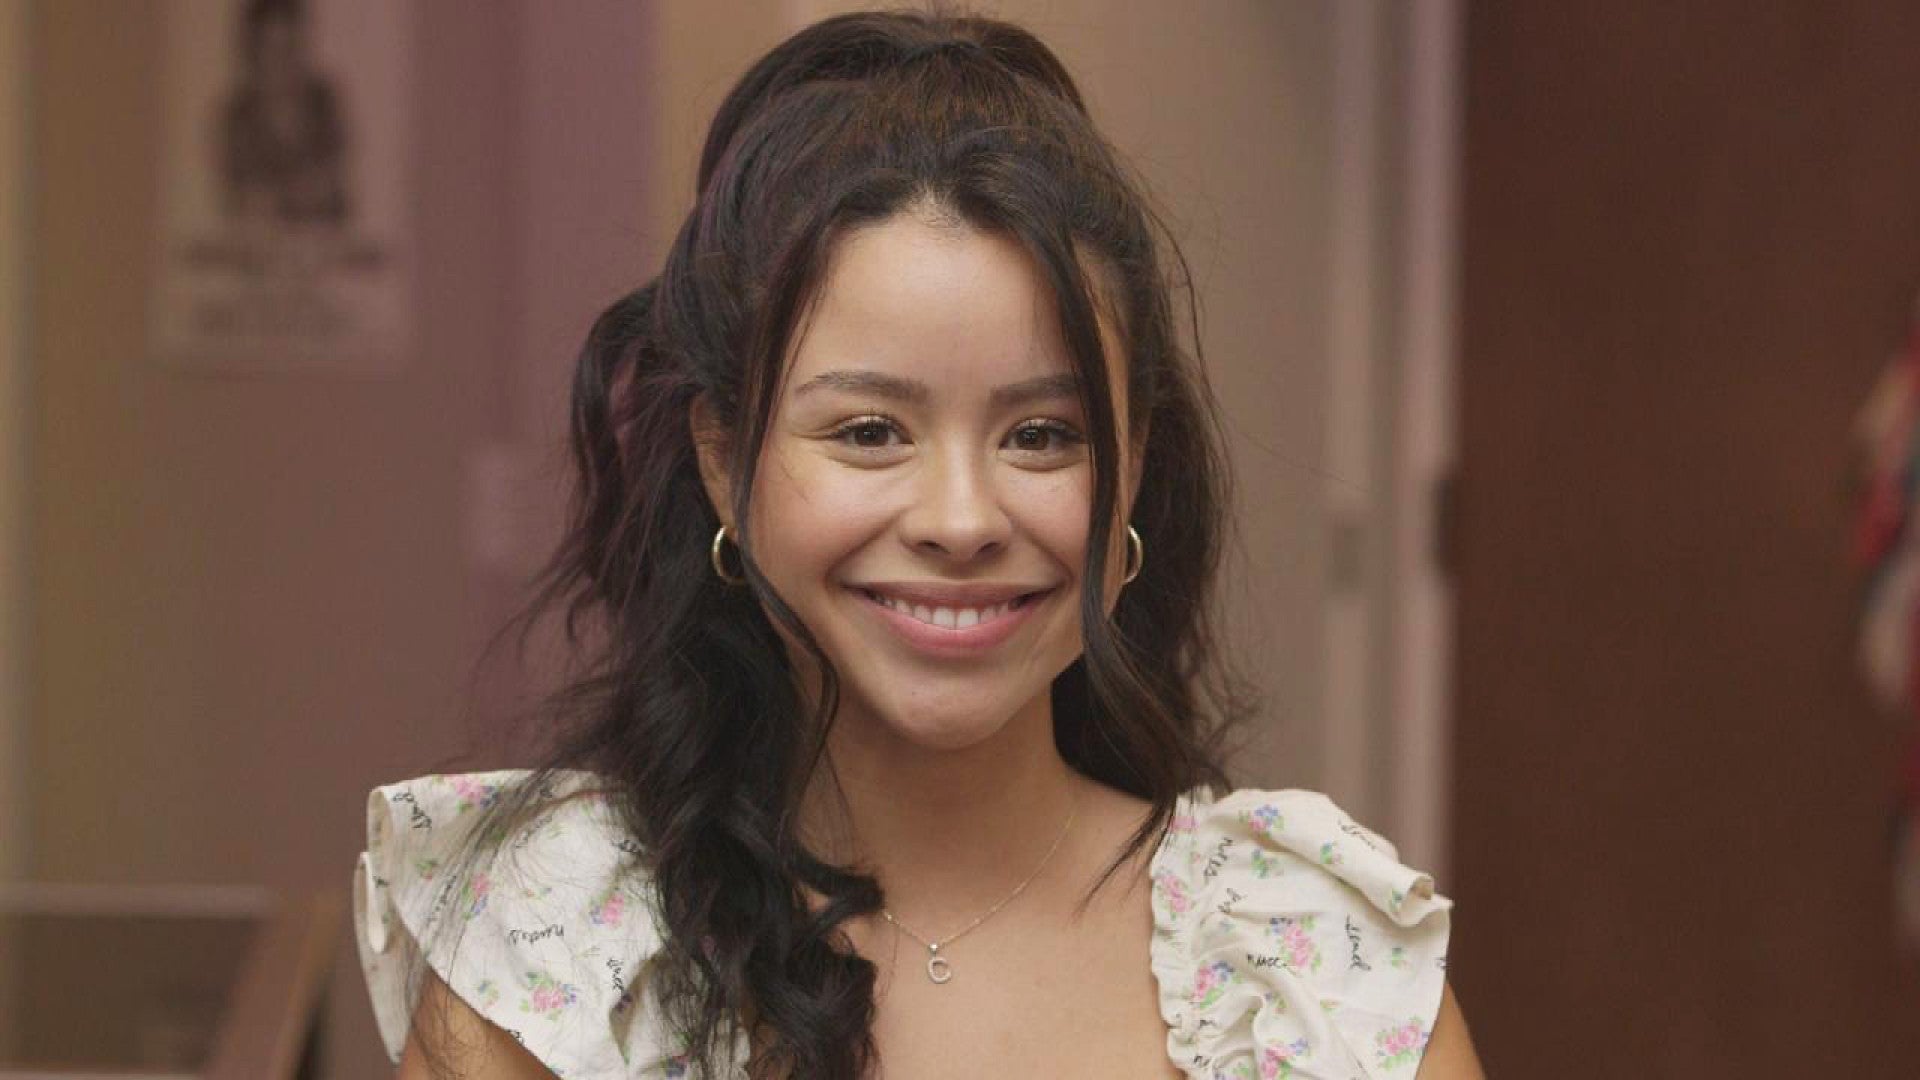 Cierra Ramirez Teases New Music And Talks Learning To Love Herself